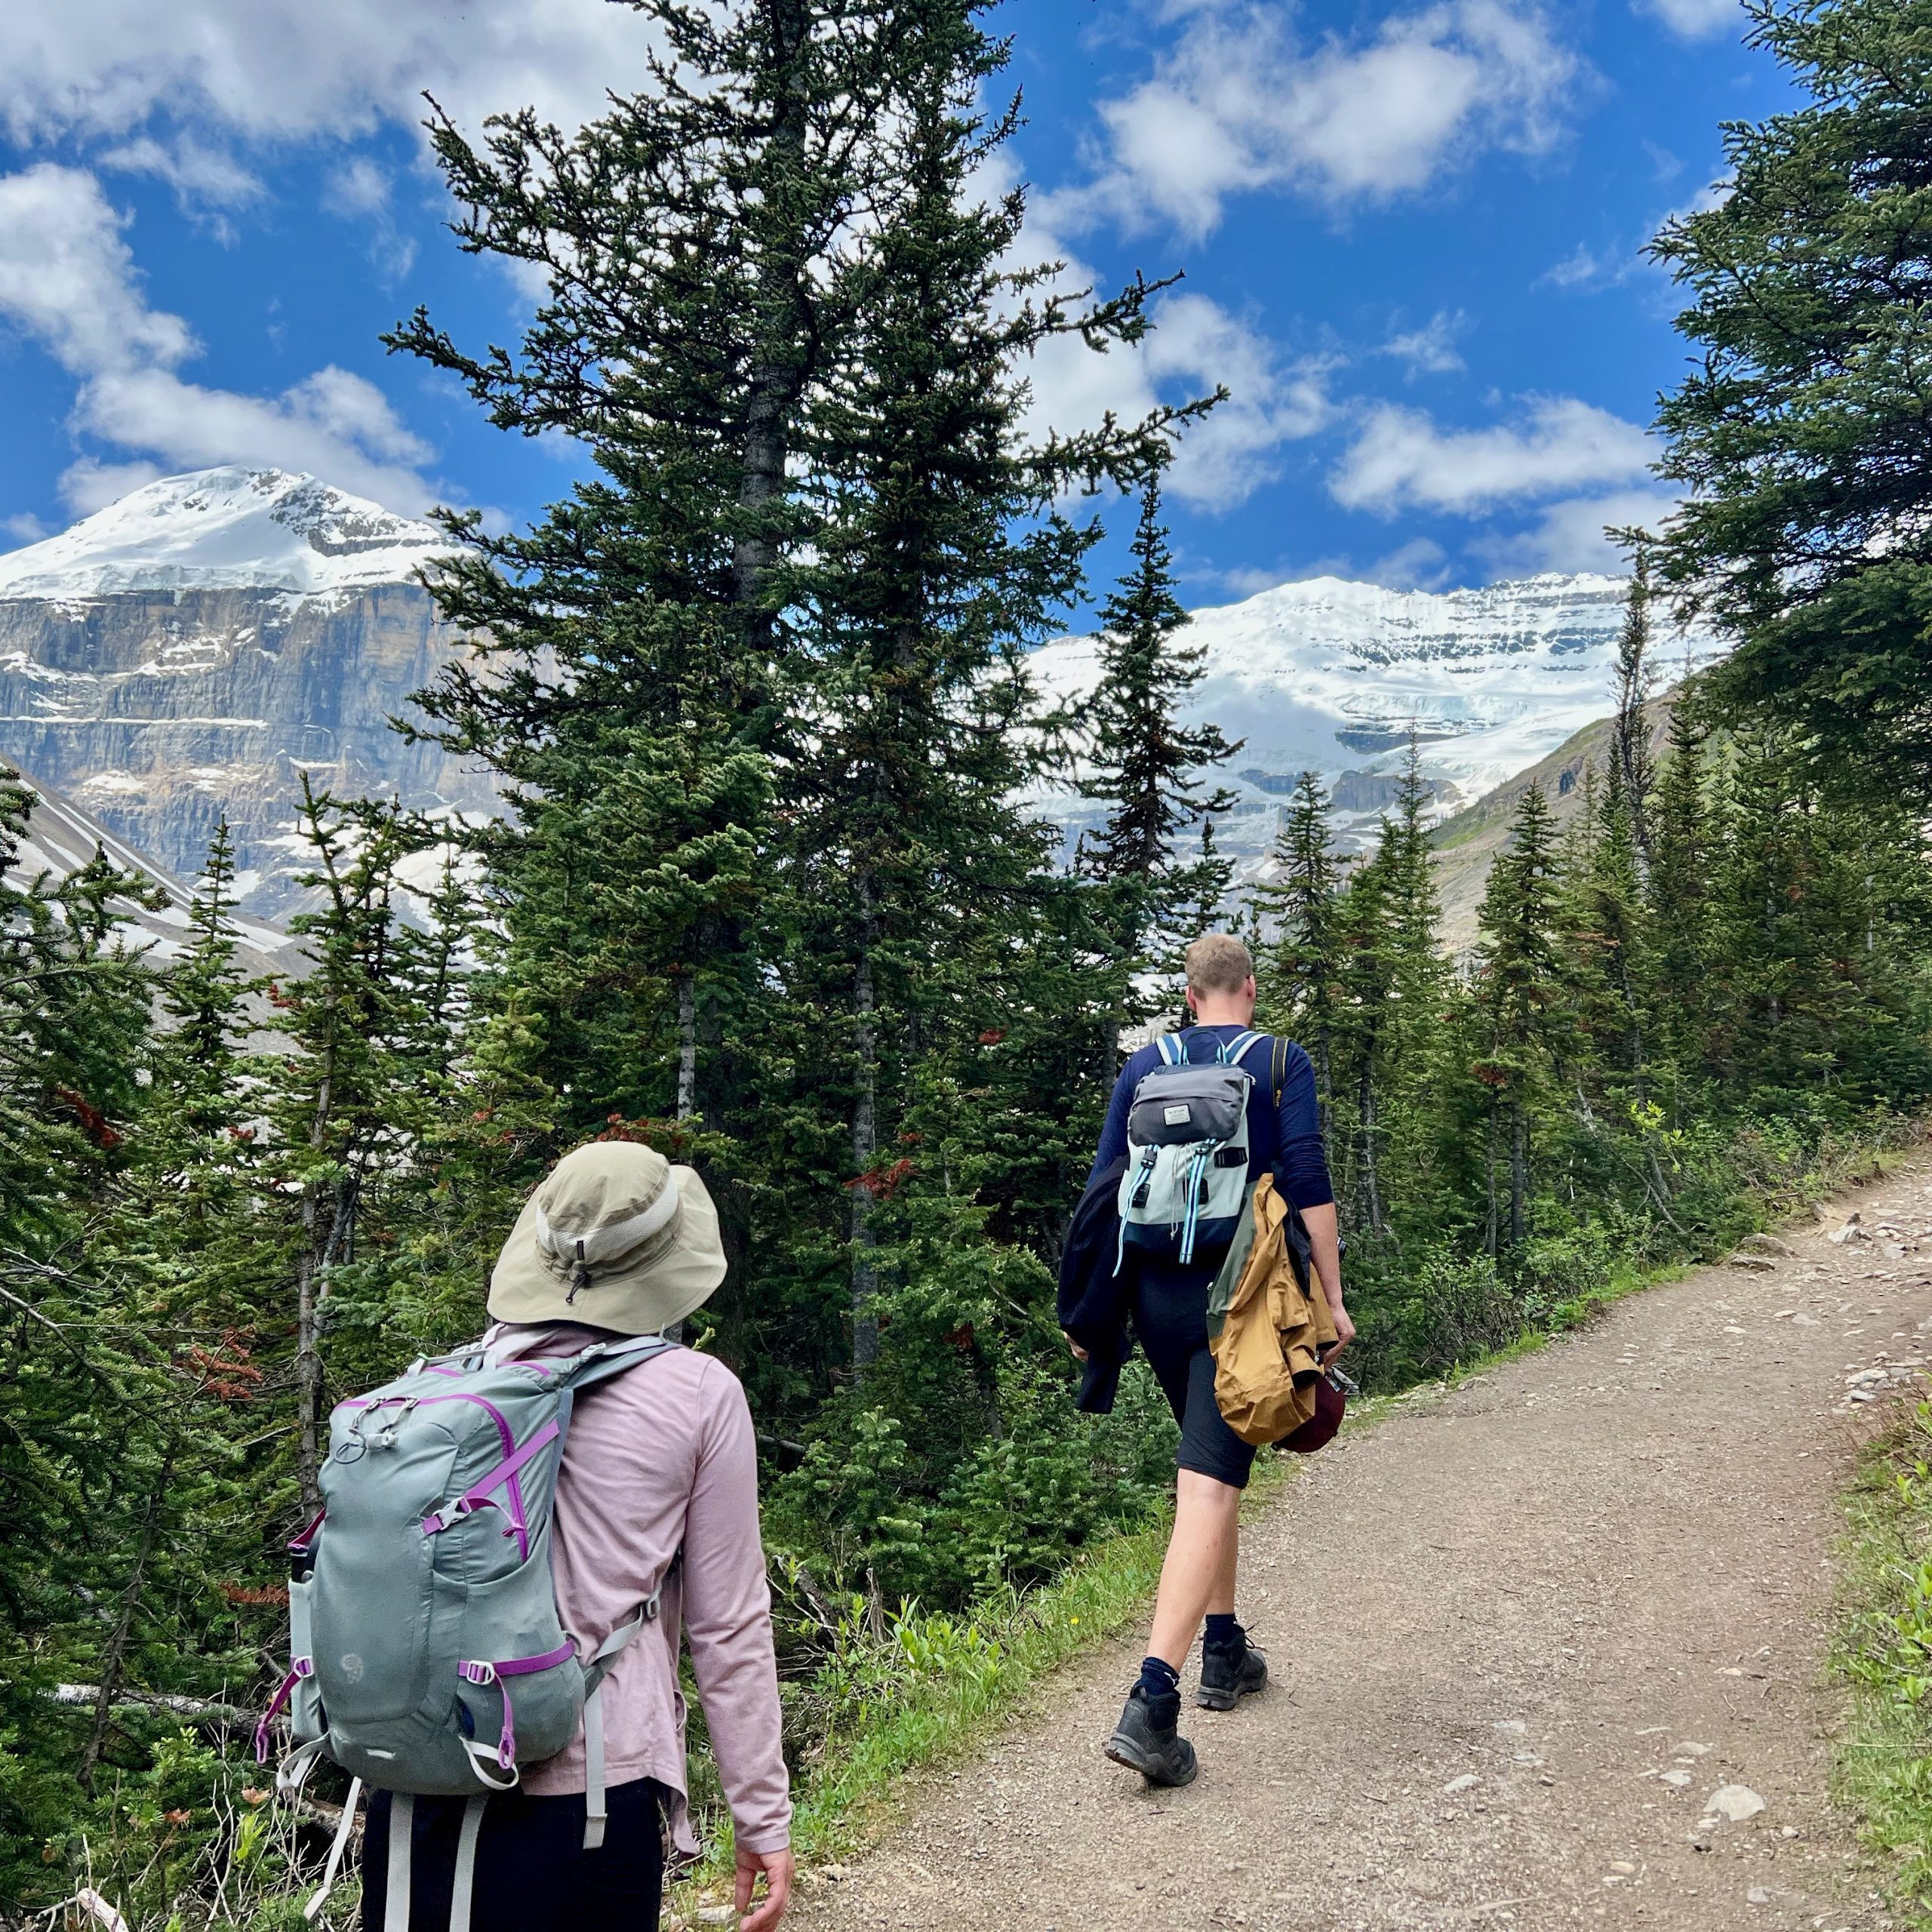 Two people hike with backpacks in the Canadian Rockies at Banff National Park. Trees line the dirt path with snow-covered mountains in the distance.